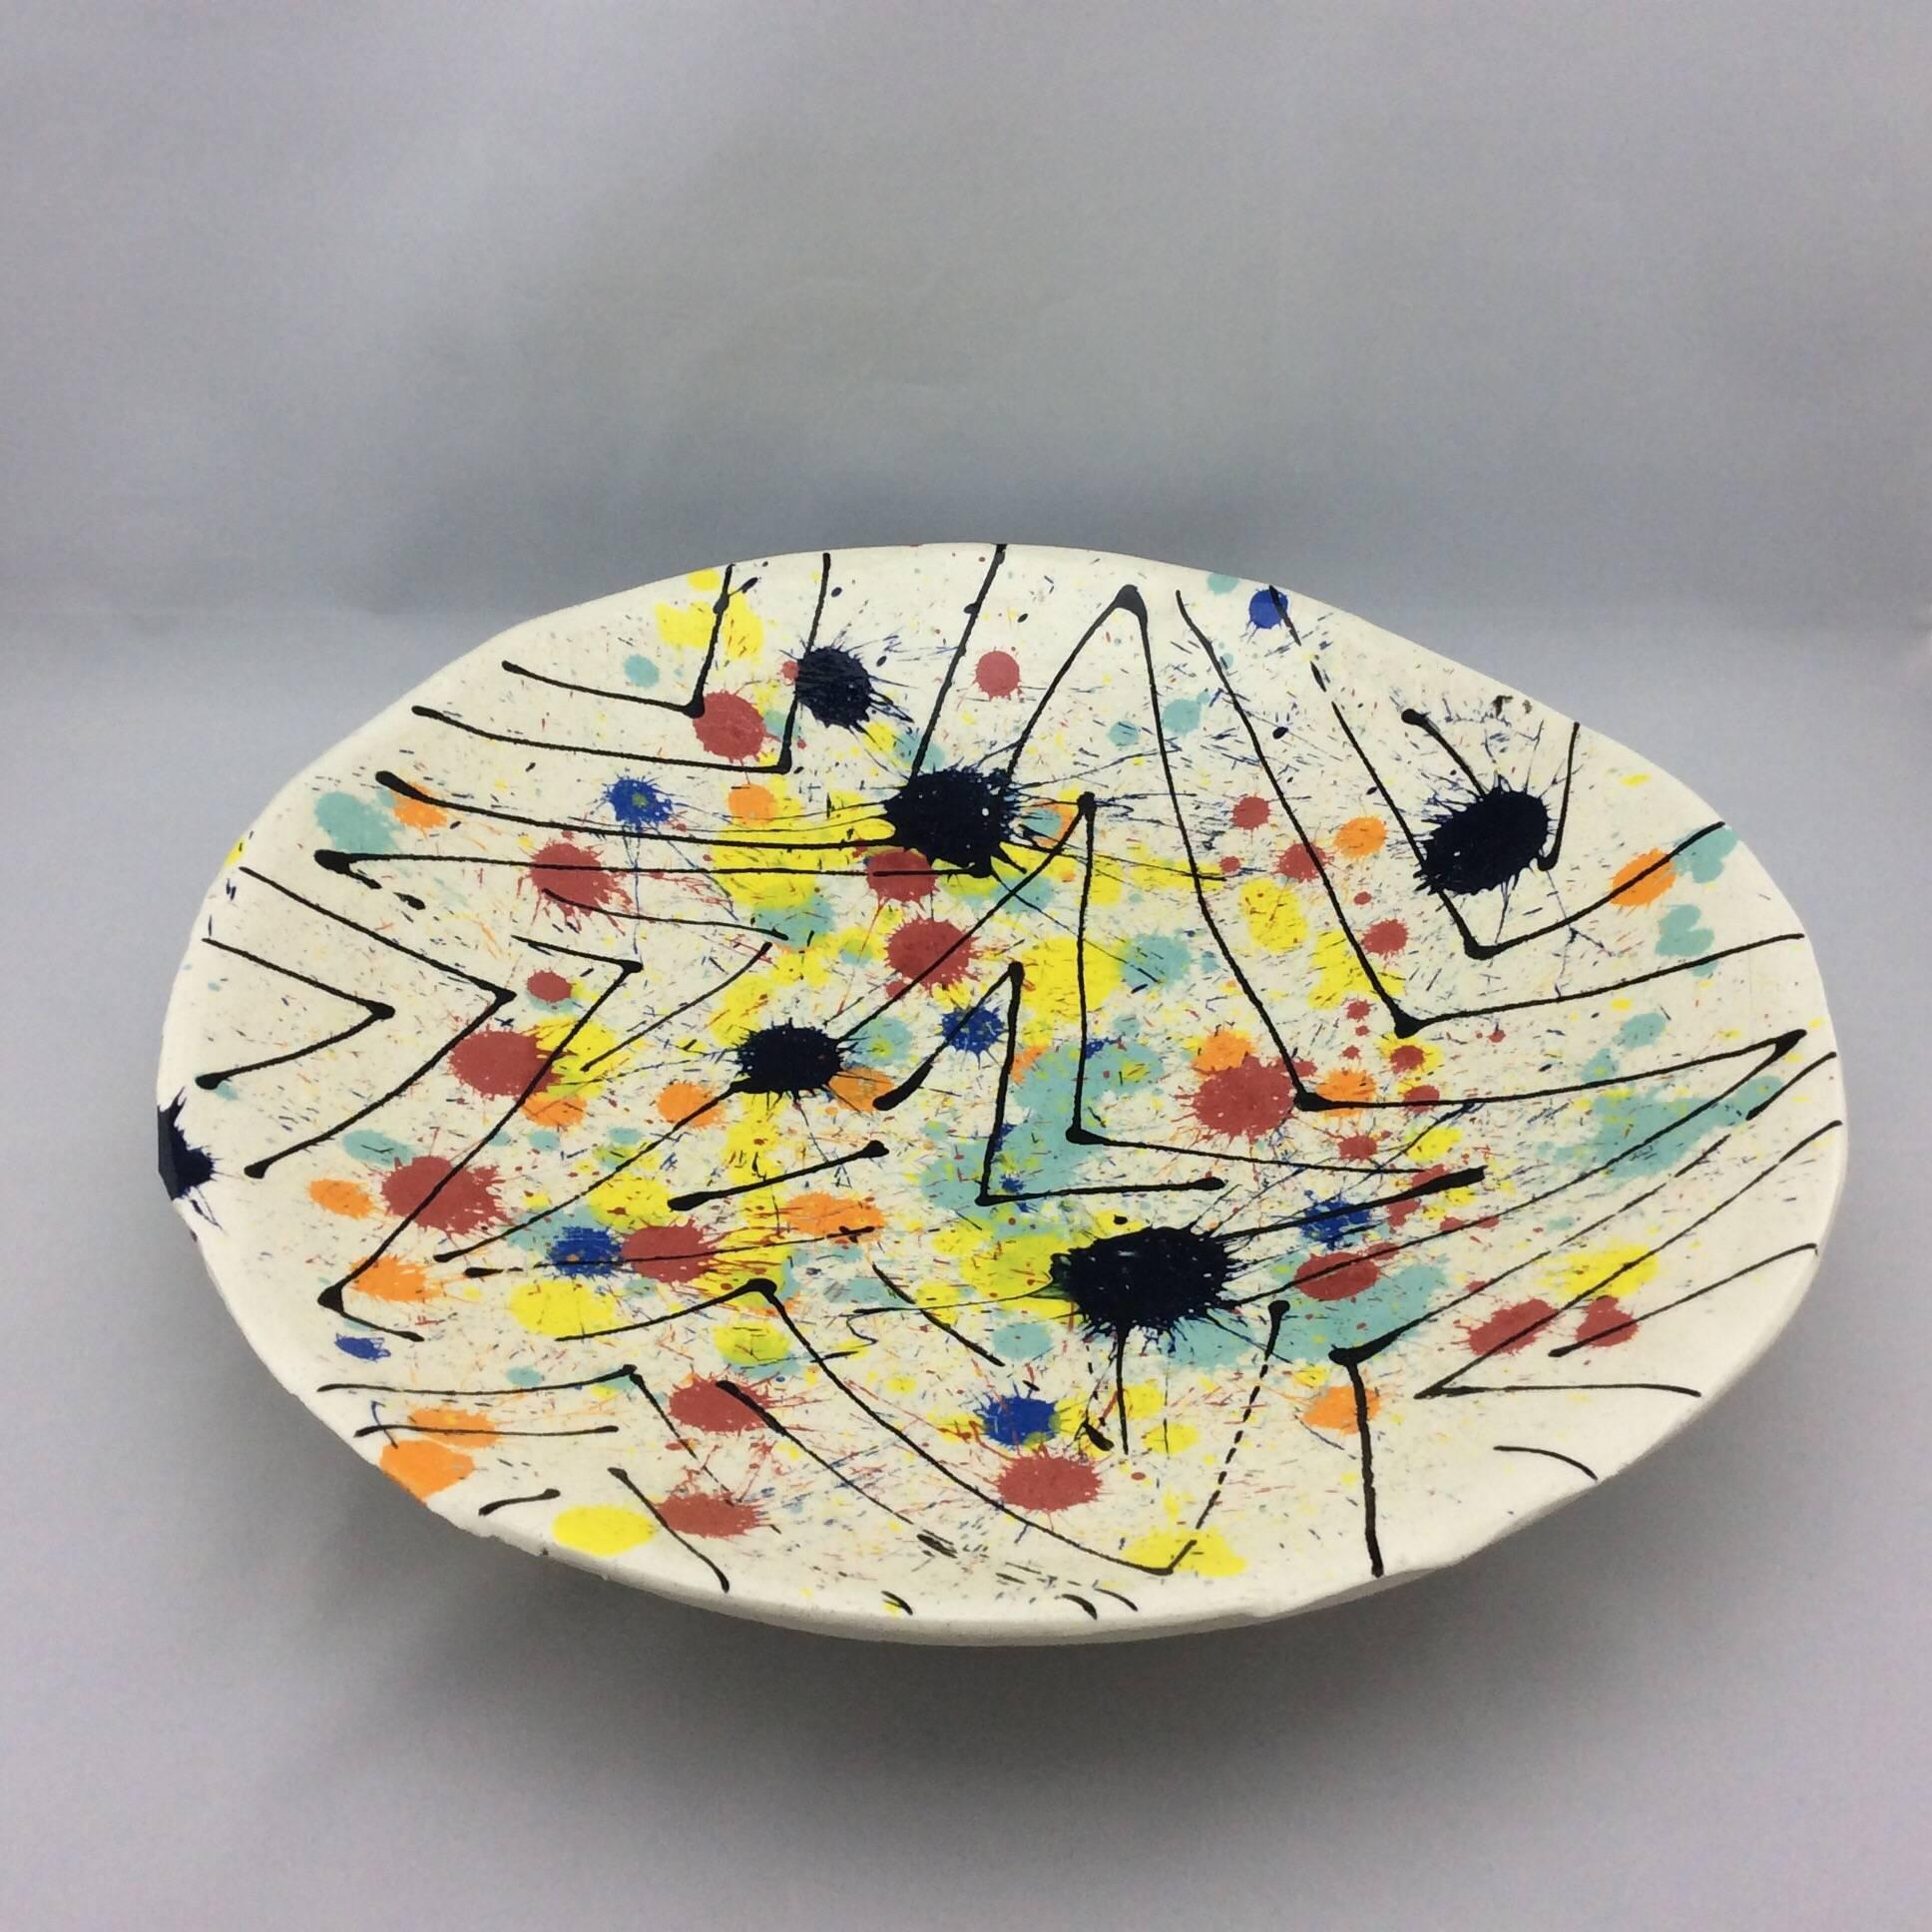 Large vintage handcrafted abstract pottery platter. Signed and dated 1972. Colorful and very unique. 
No known issues that would detract from value or aesthetics.